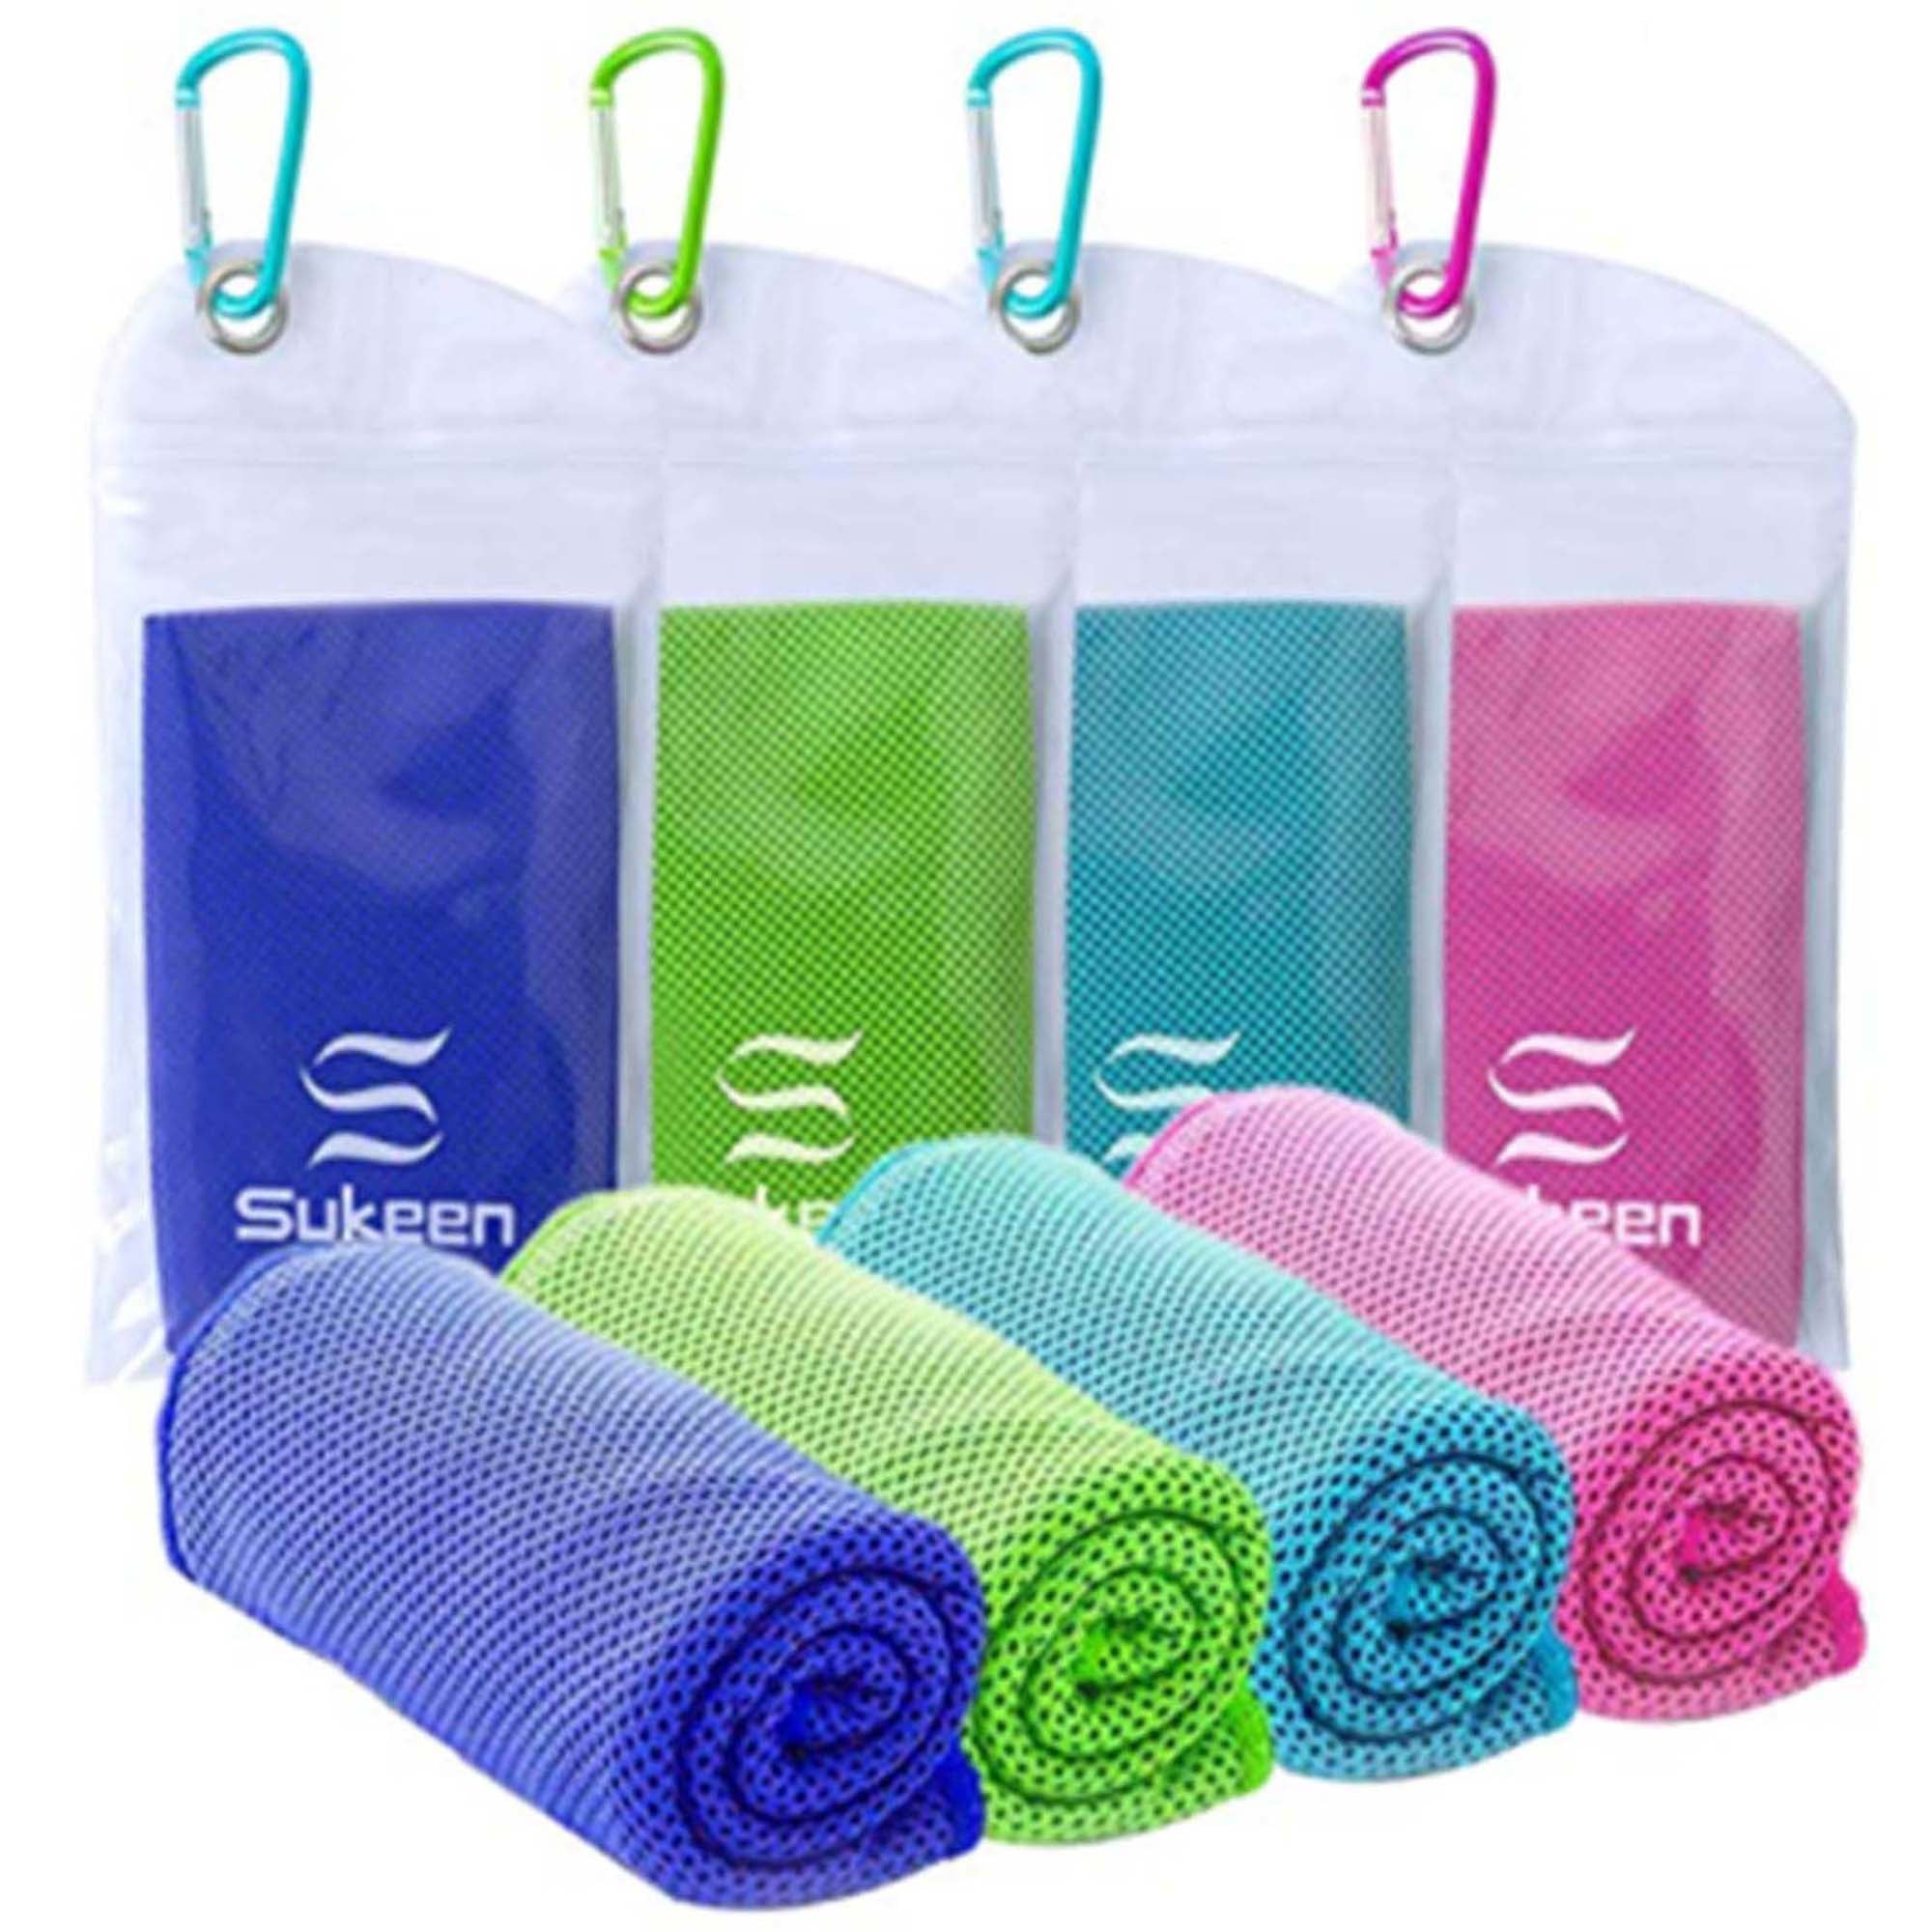 Cooling Towel That You Snap